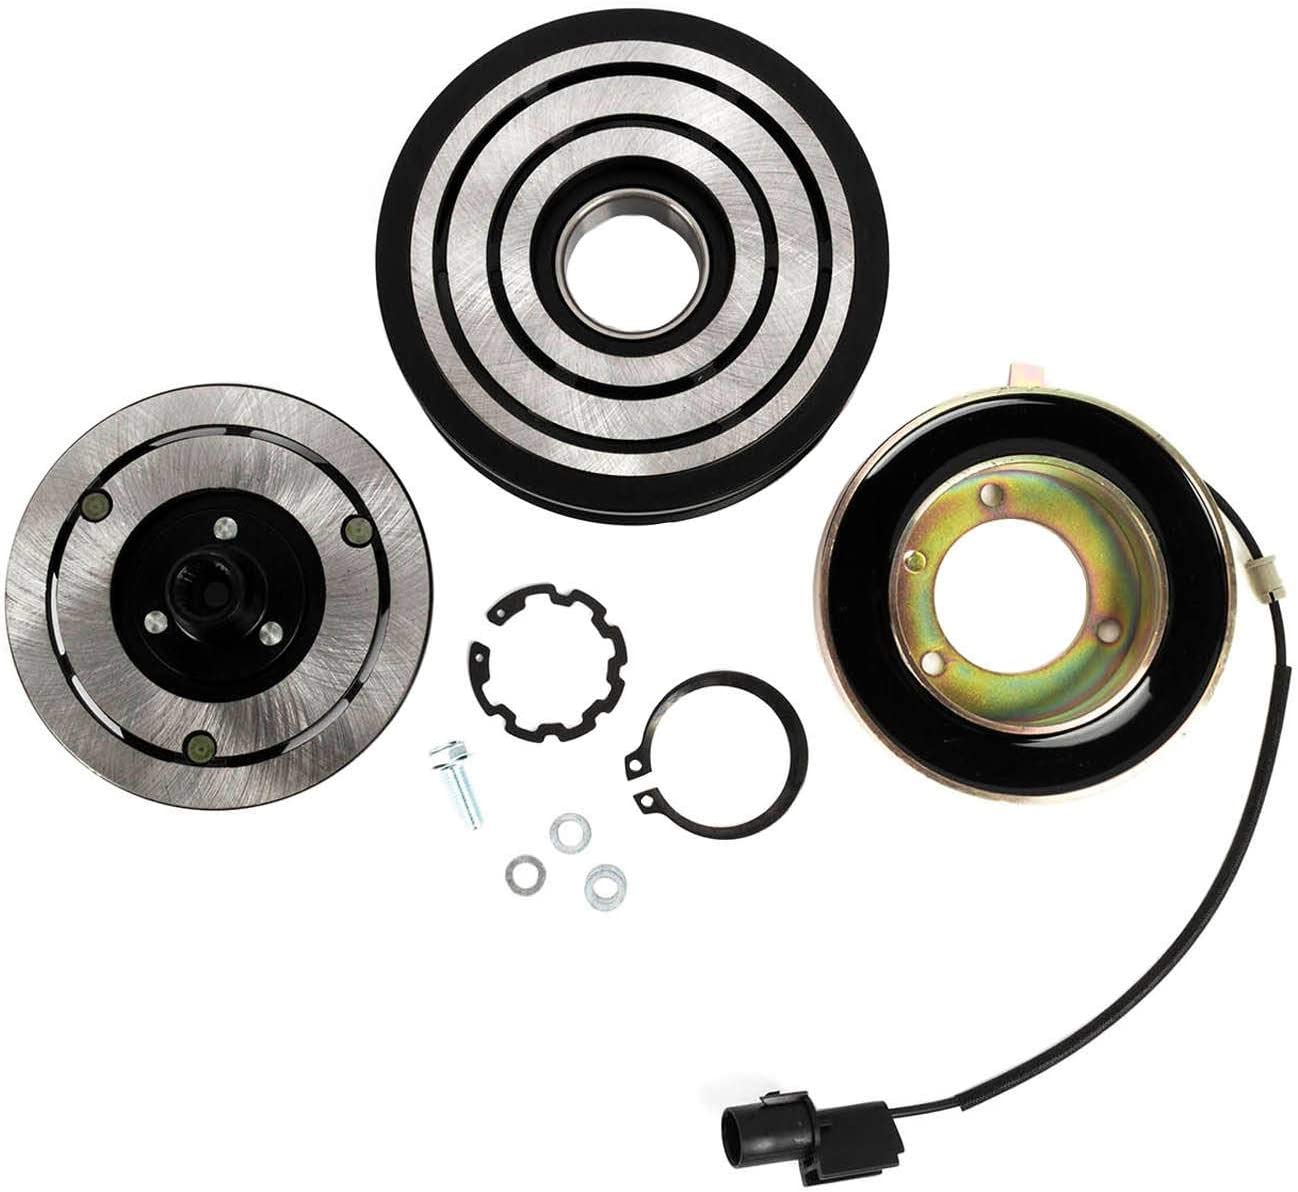 KARPAL AC A/C Compressor Clutch Assembly Repair Kit ALT020625 Compatible With 2002-2006 Nissan Altima